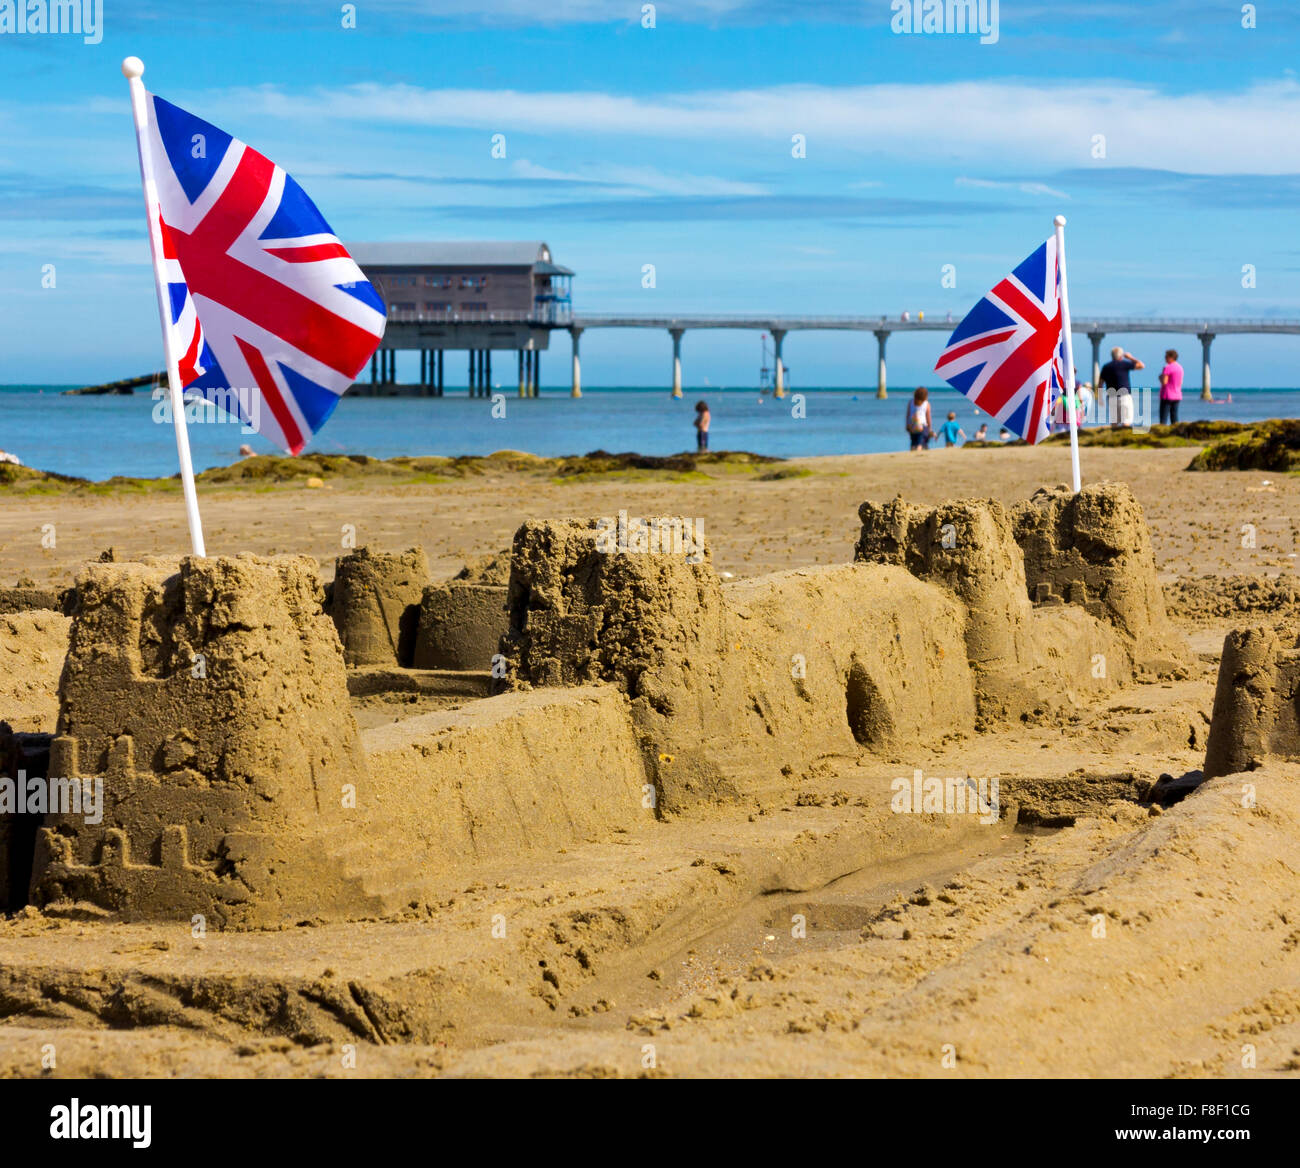 Traditional British sand castle with Union Jack flags on a beach in summer in Bembridge Isle of Wight England UK Stock Photo